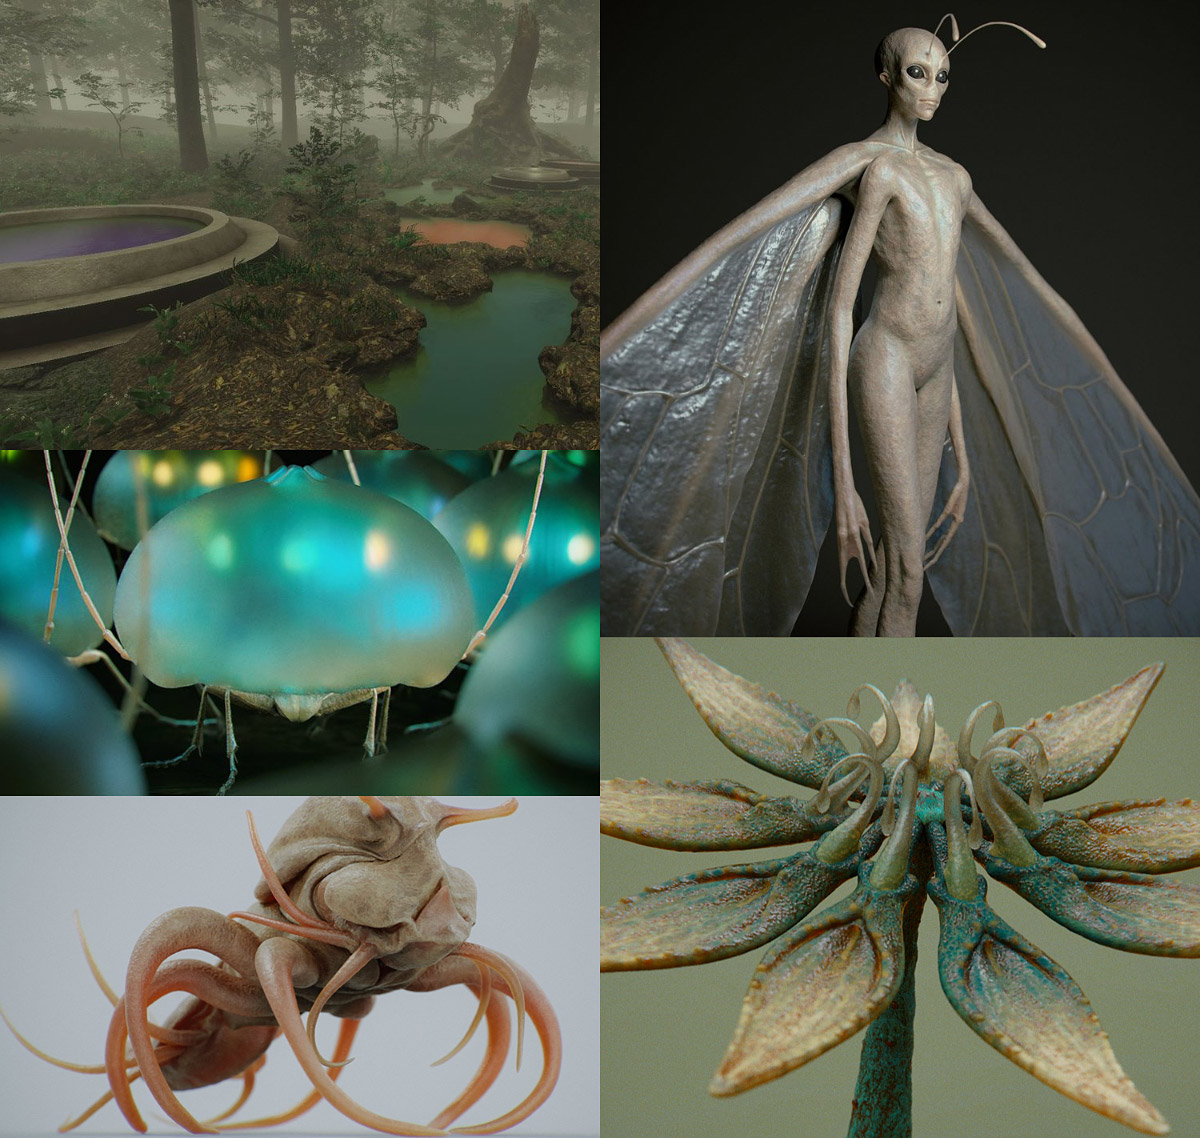 Grid of five images from inside the virtual reality world of Symbiosis: imaginary plants, animals, and an alien-like being with wings